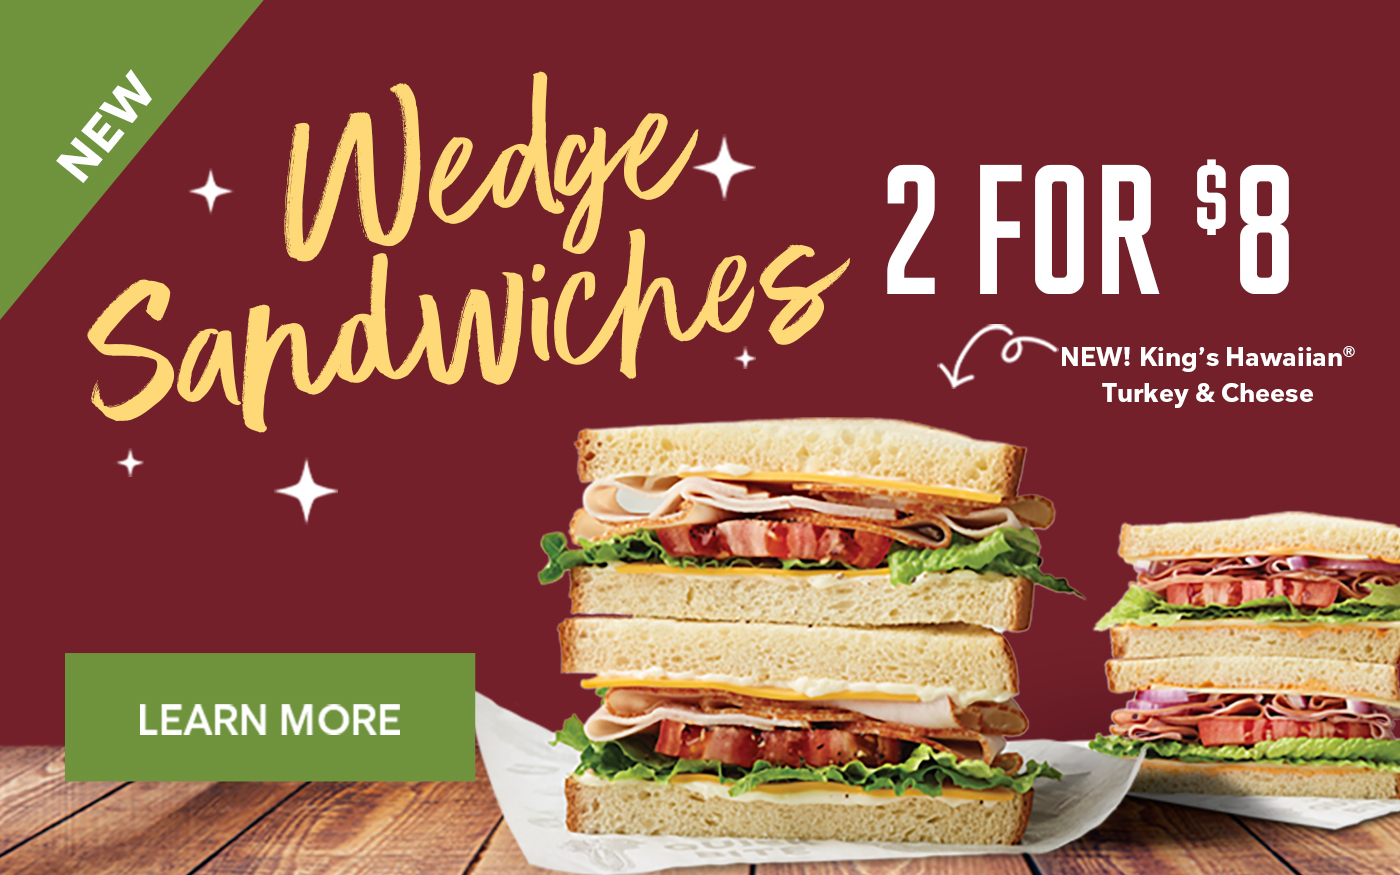 New Turkey and Cheese Wedge Sandwich on the Lunch Menu at Your Local Convenience Store